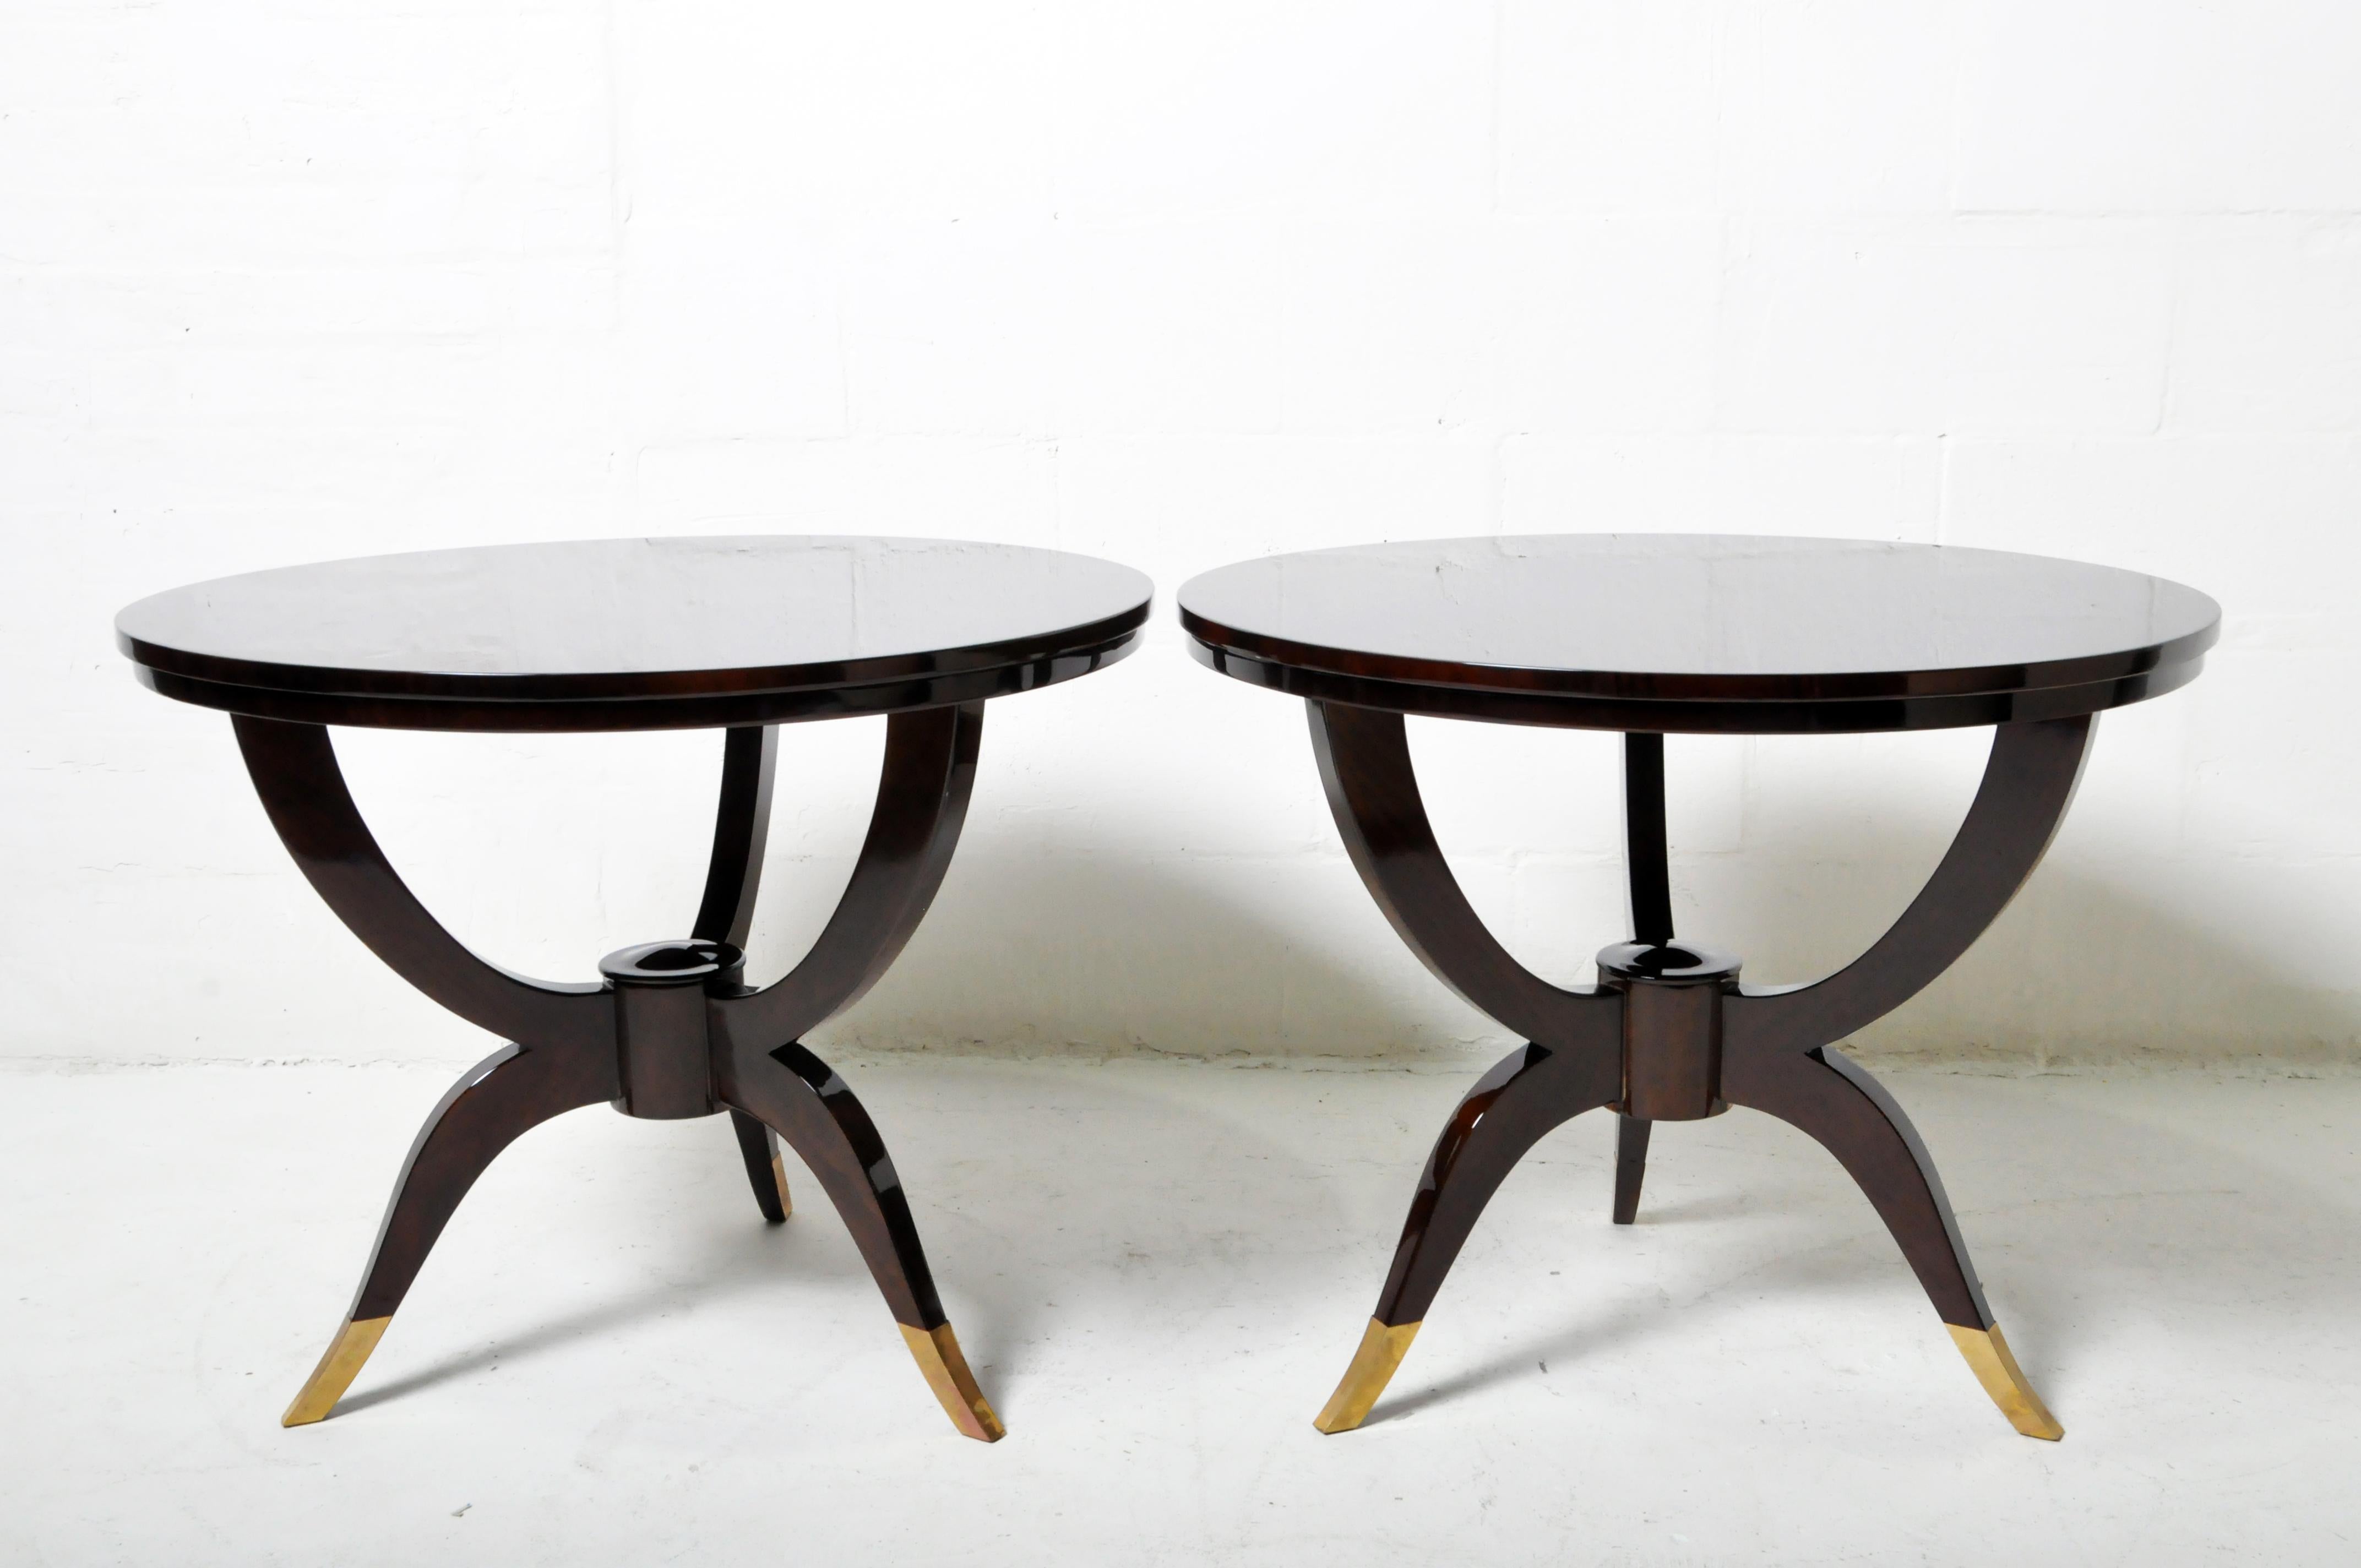 An elegant pair of curvaceous Art Deco French-style side tables in pie-matched walnut veneer. The feet are sheathed in brass.